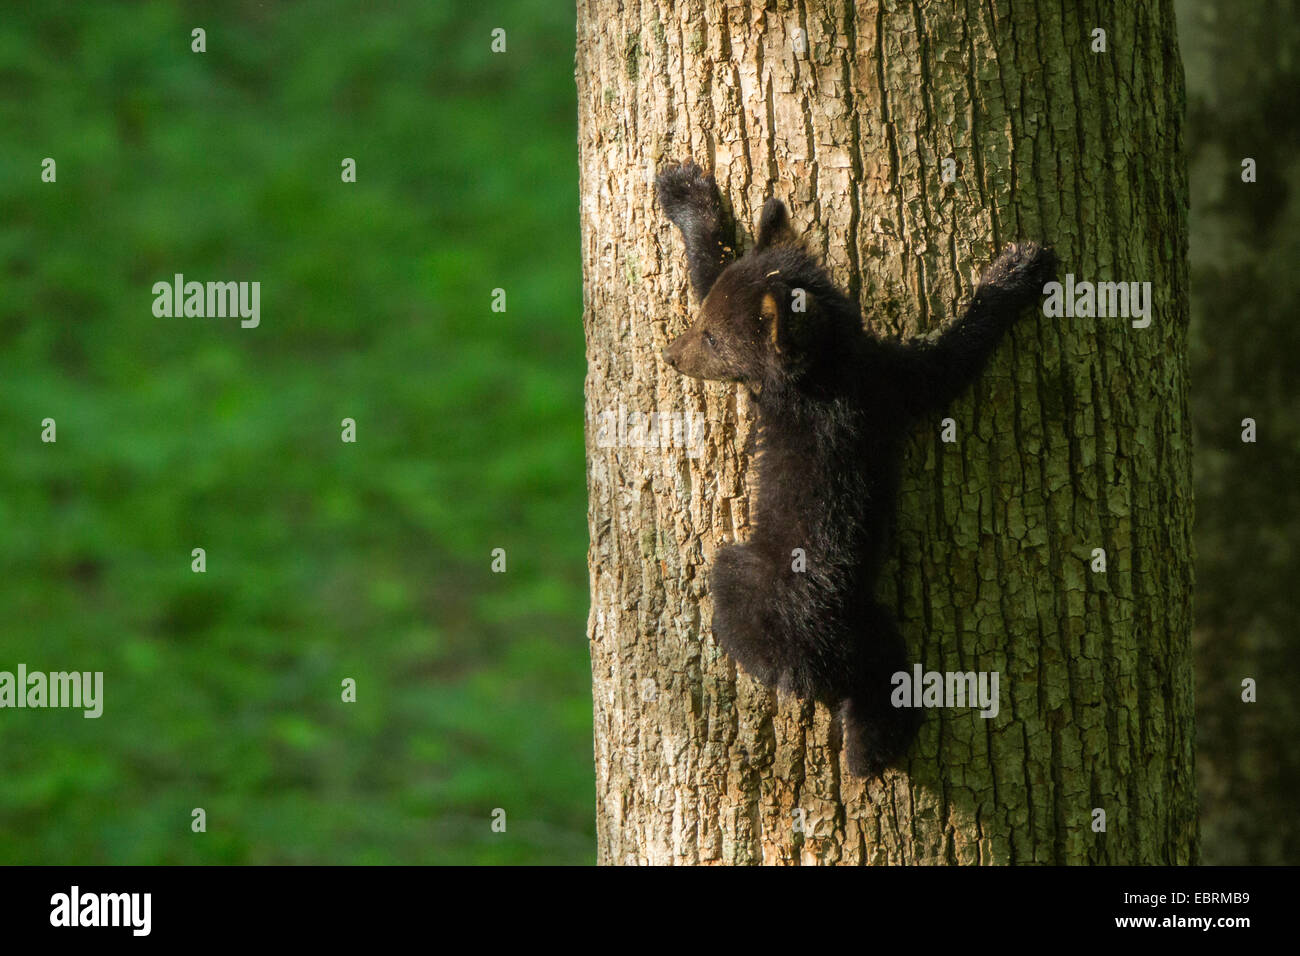 American black bear (Ursus americanus), little bear cub climbing up at a thick tree trunk, USA, Tennessee, Great Smoky Mountains National Park Stock Photo